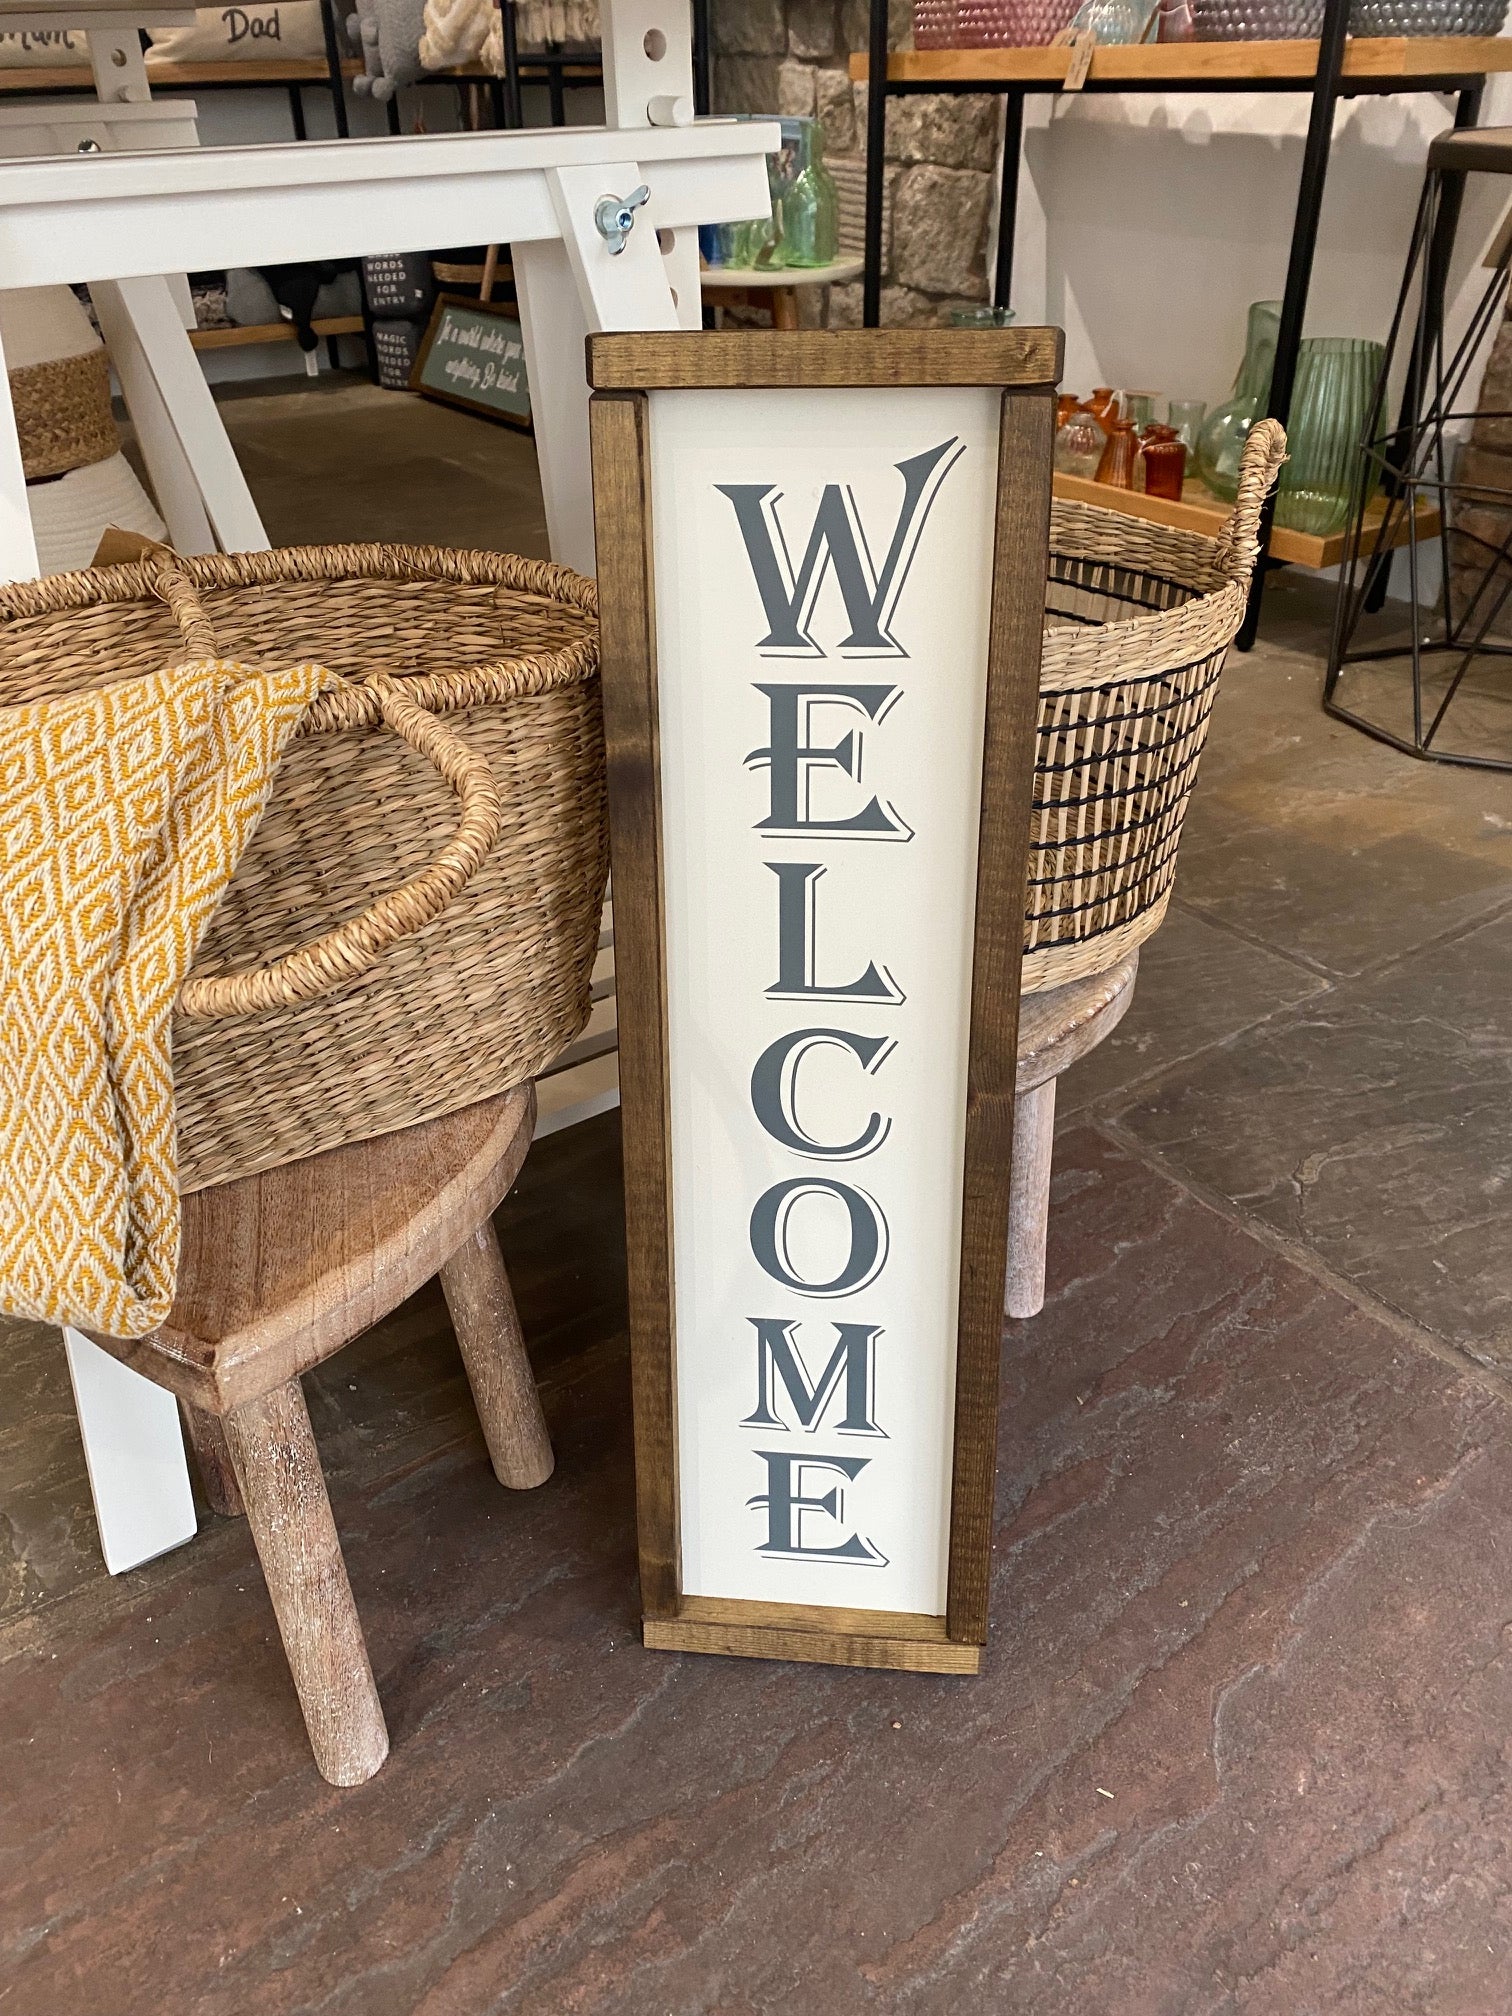 'Welcome' Sign